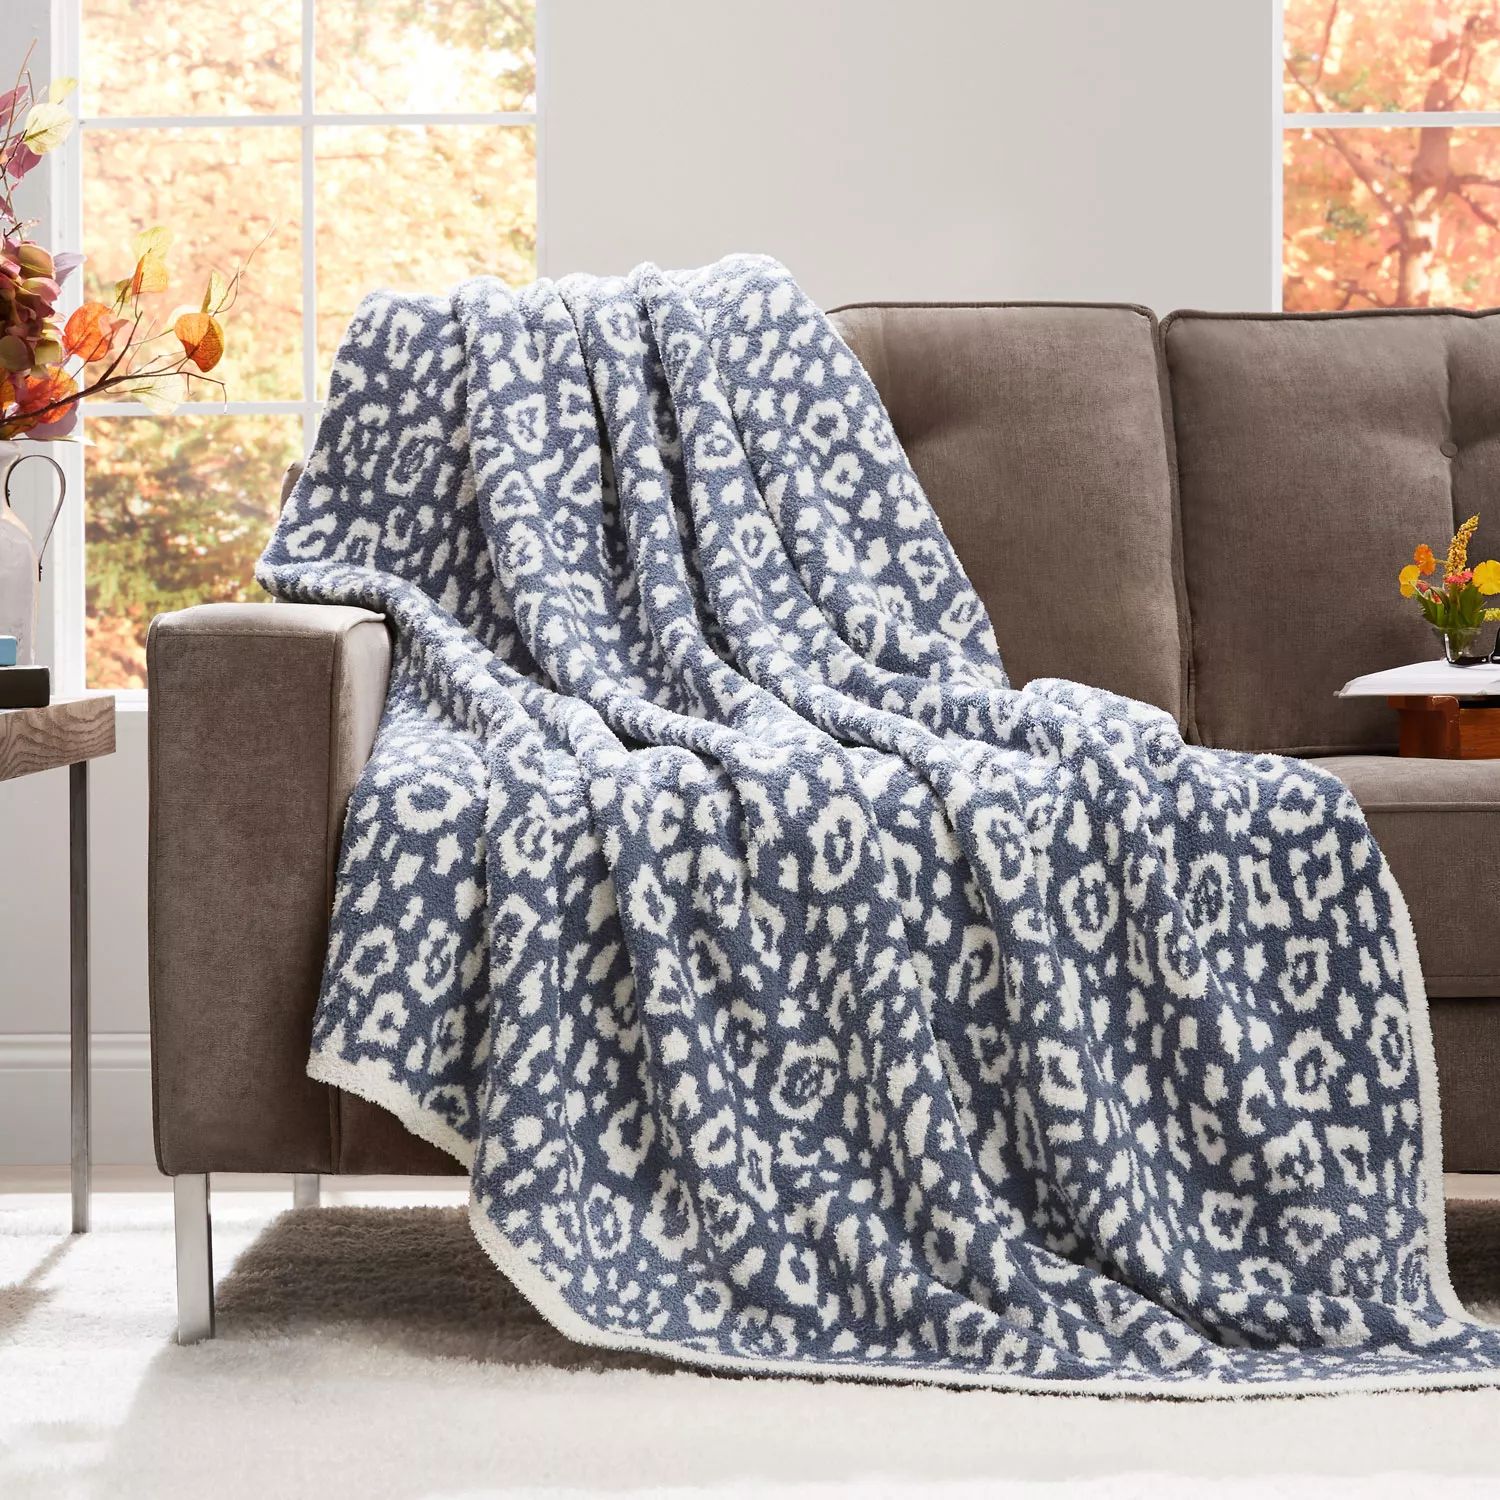 Member's Mark Luxury Premier Collection Cozy Knit Animal Print Throw (Assorted Colors) | Sam's Club